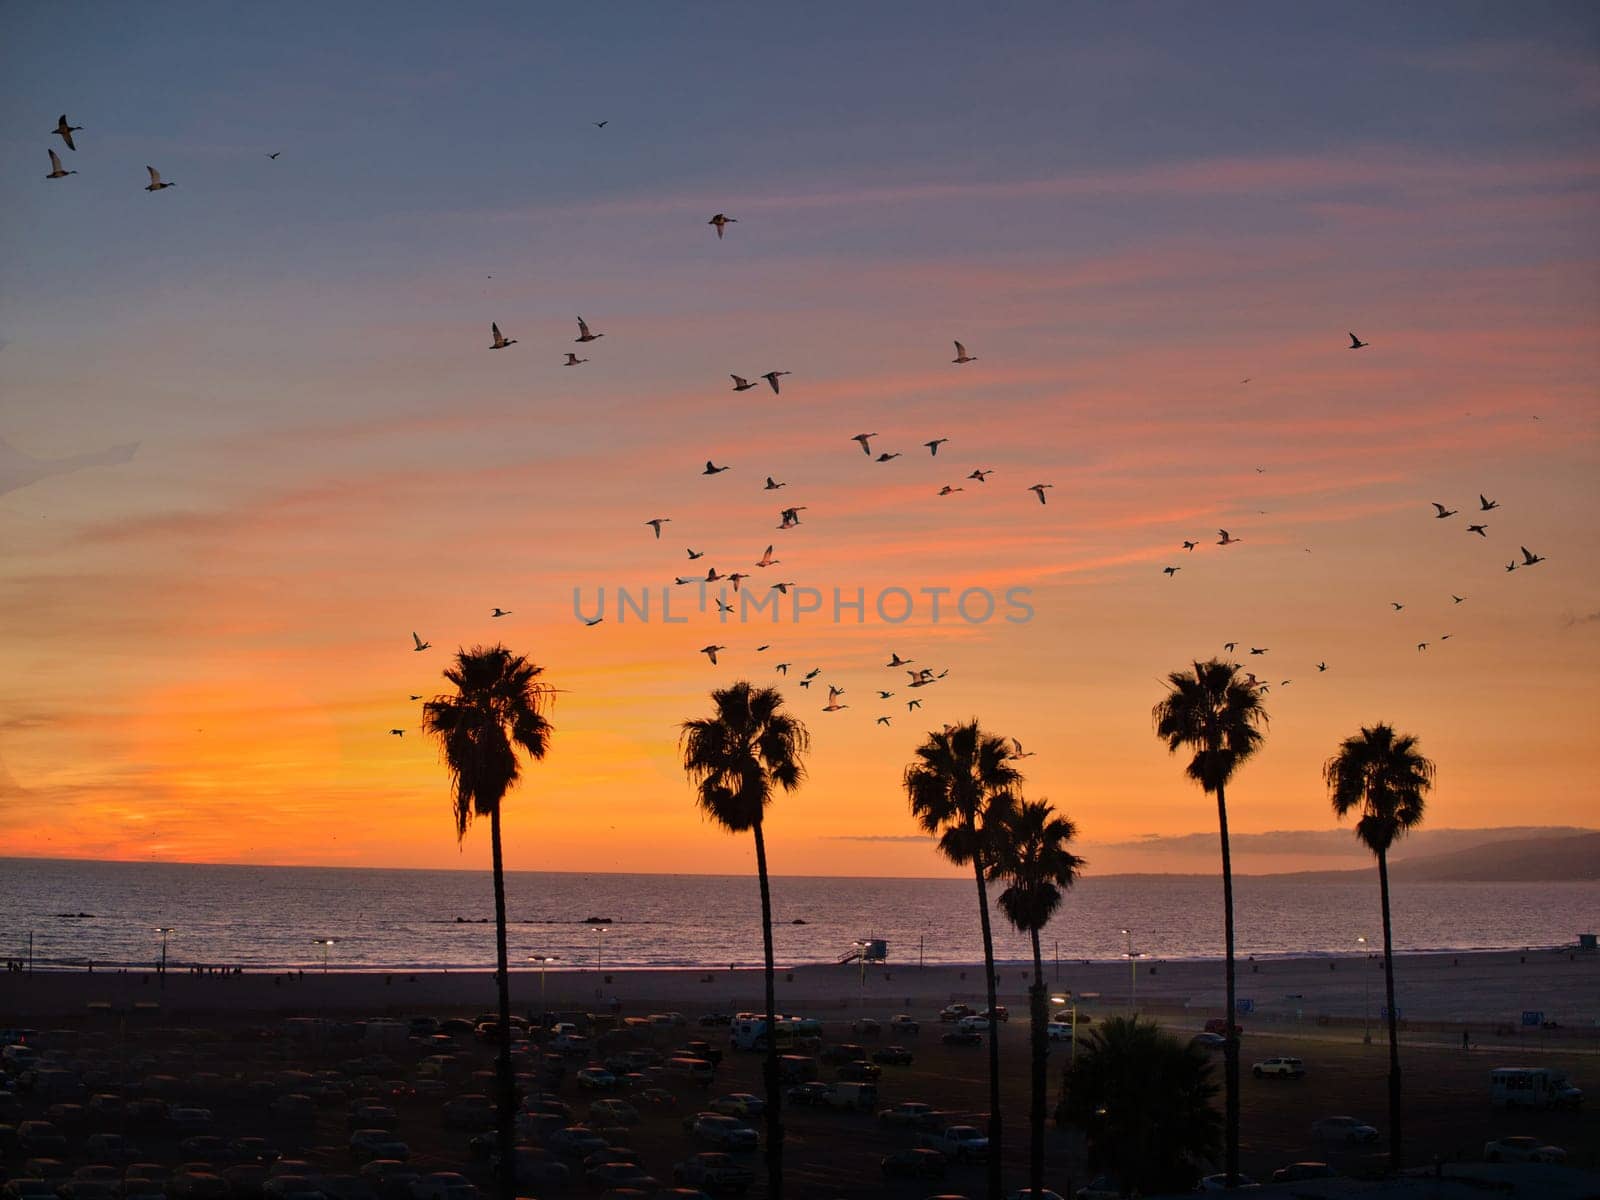 A flock of birds flying over a beach at sunset. Photo of a mesmerizing sunset over a beautiful beach with a flock of birds gracefully soaring through the vibrant sky